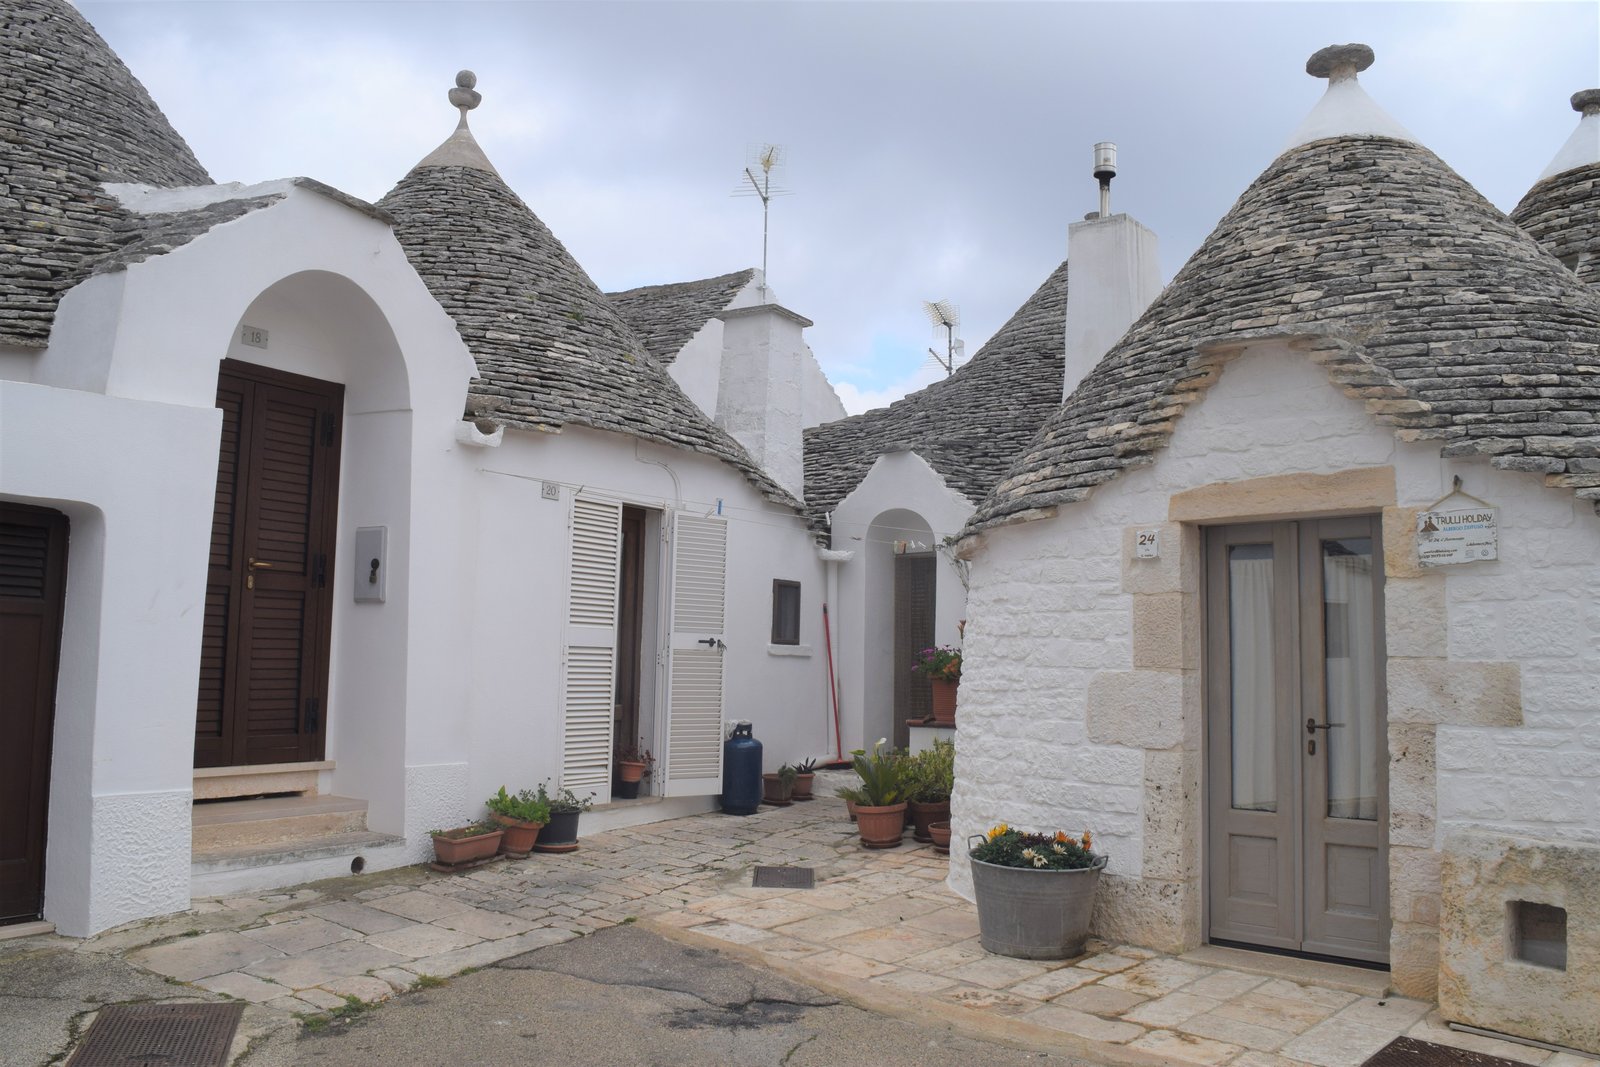 Alberobello, Italy is such an amazing place. A UNESCO World Heritage site and a must see when visiting Puglia. ouritalianjourney.com 